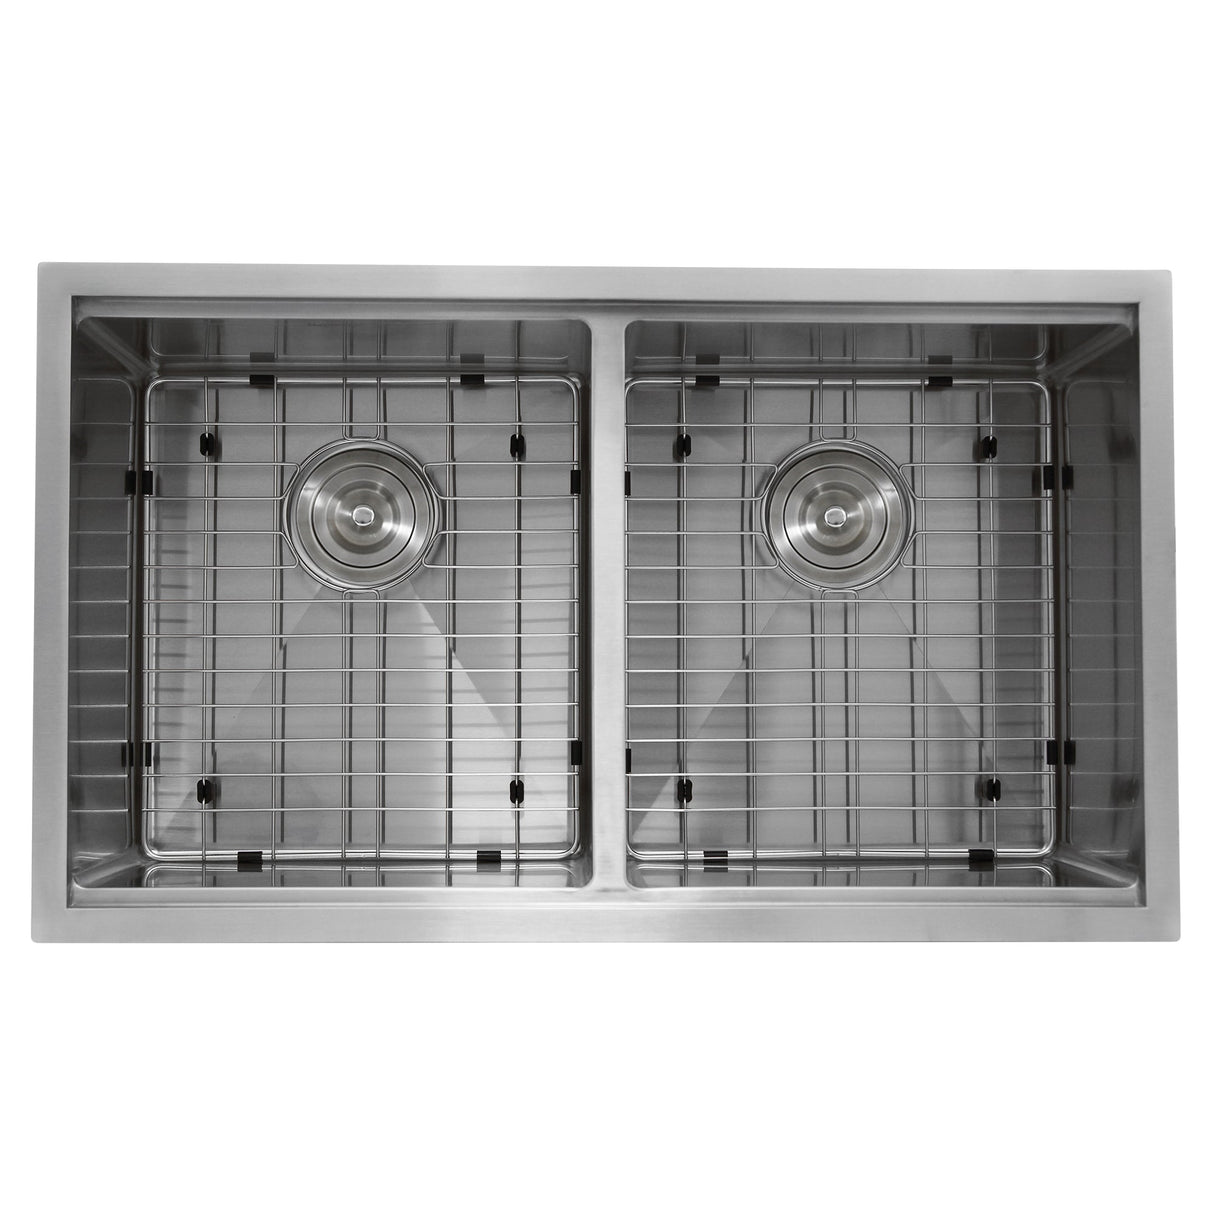 Nantucket Sinks' SR-PS-3219-DE-16 Double Equal Prep Station Small Radius Undermount Stainless Sink with Accessories